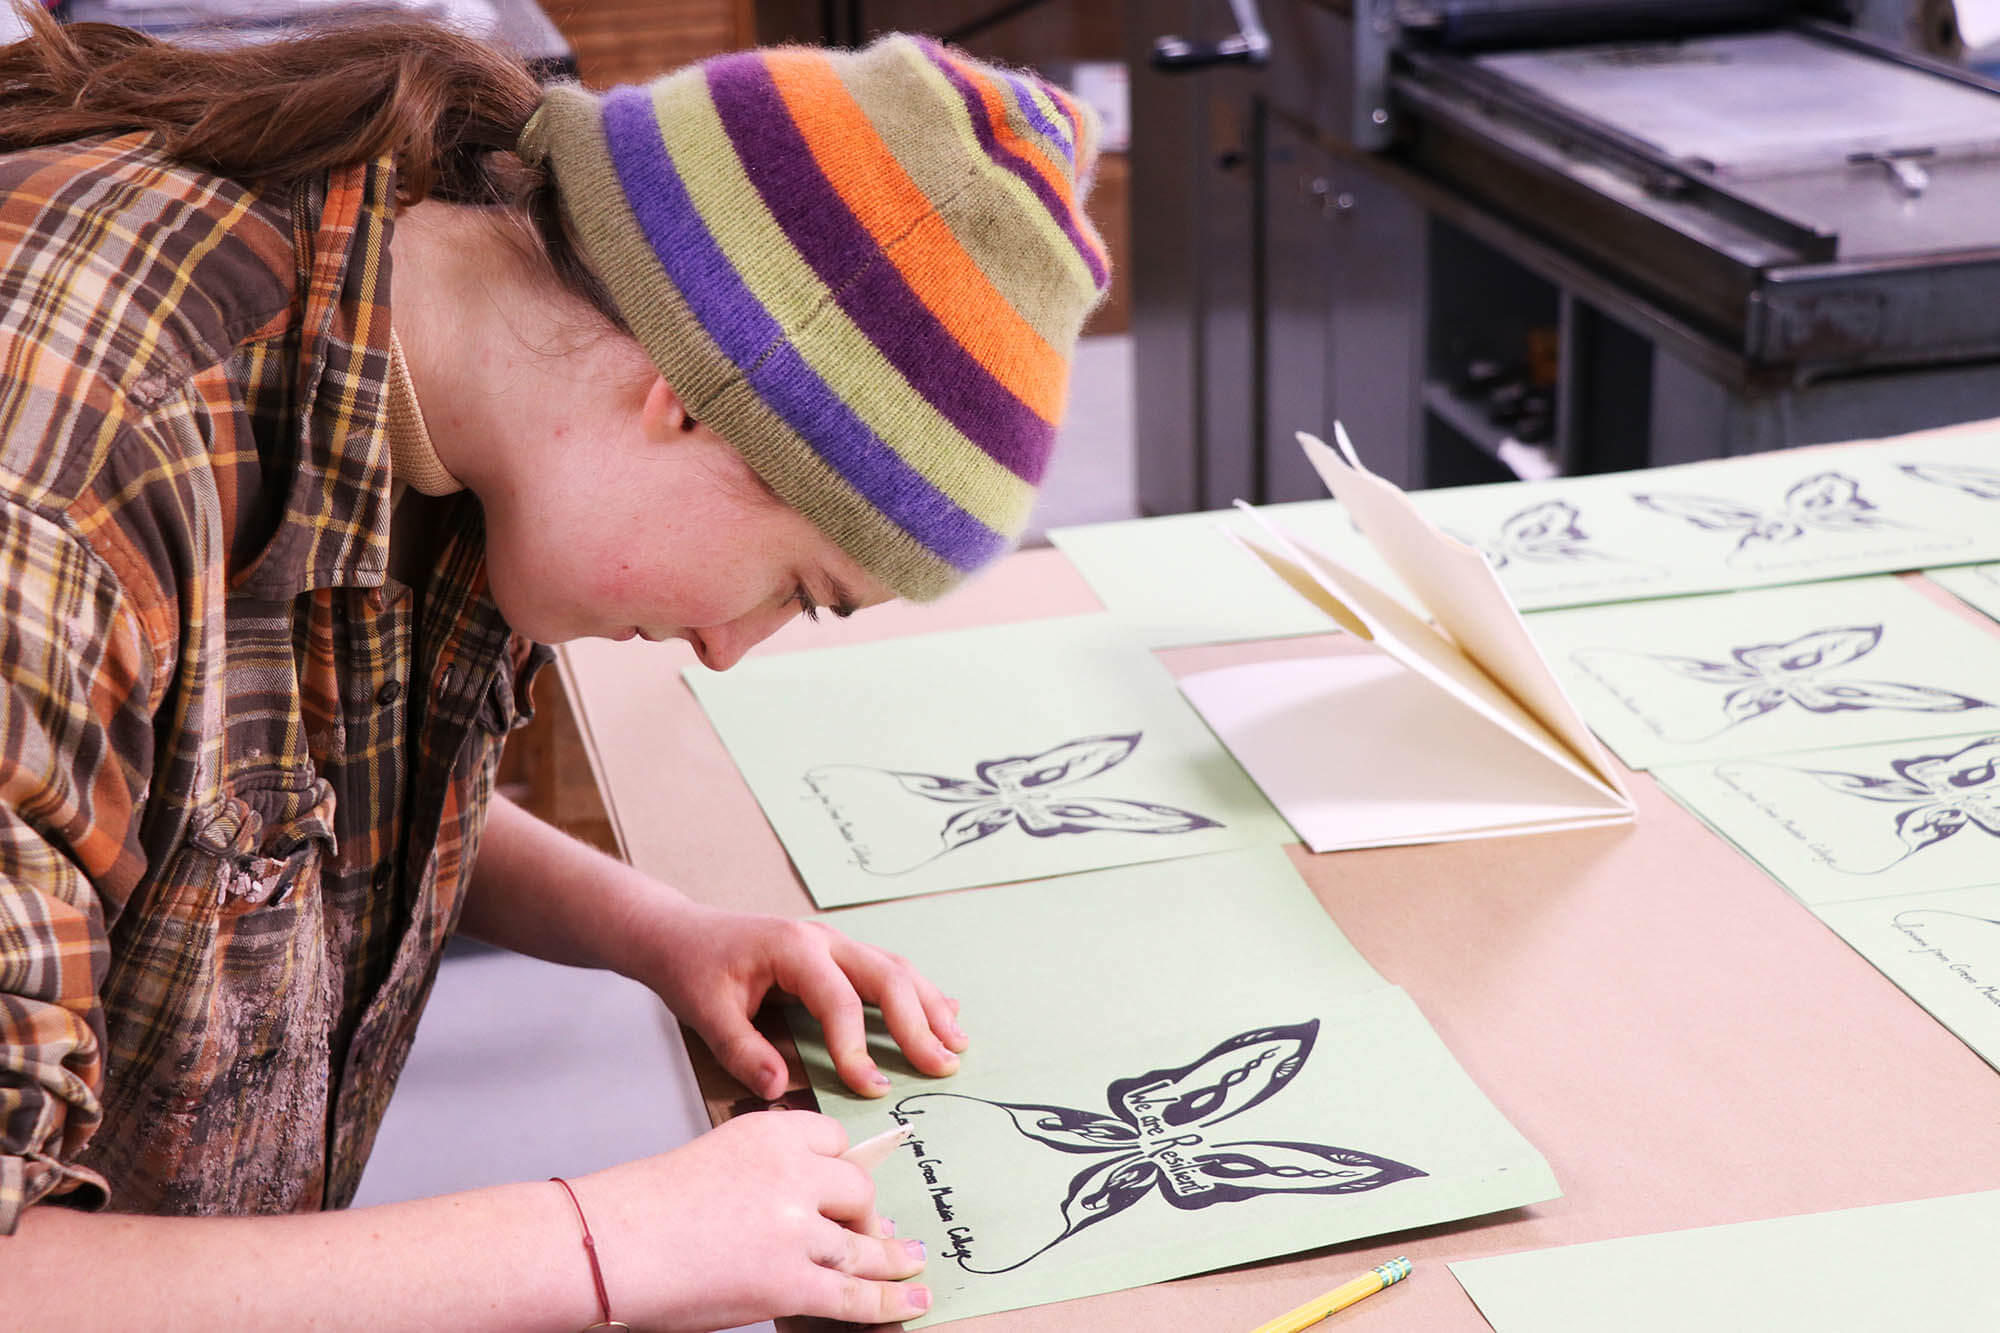 Book Arts & Design student focusing on their freshly printed letterpress design for a zine.